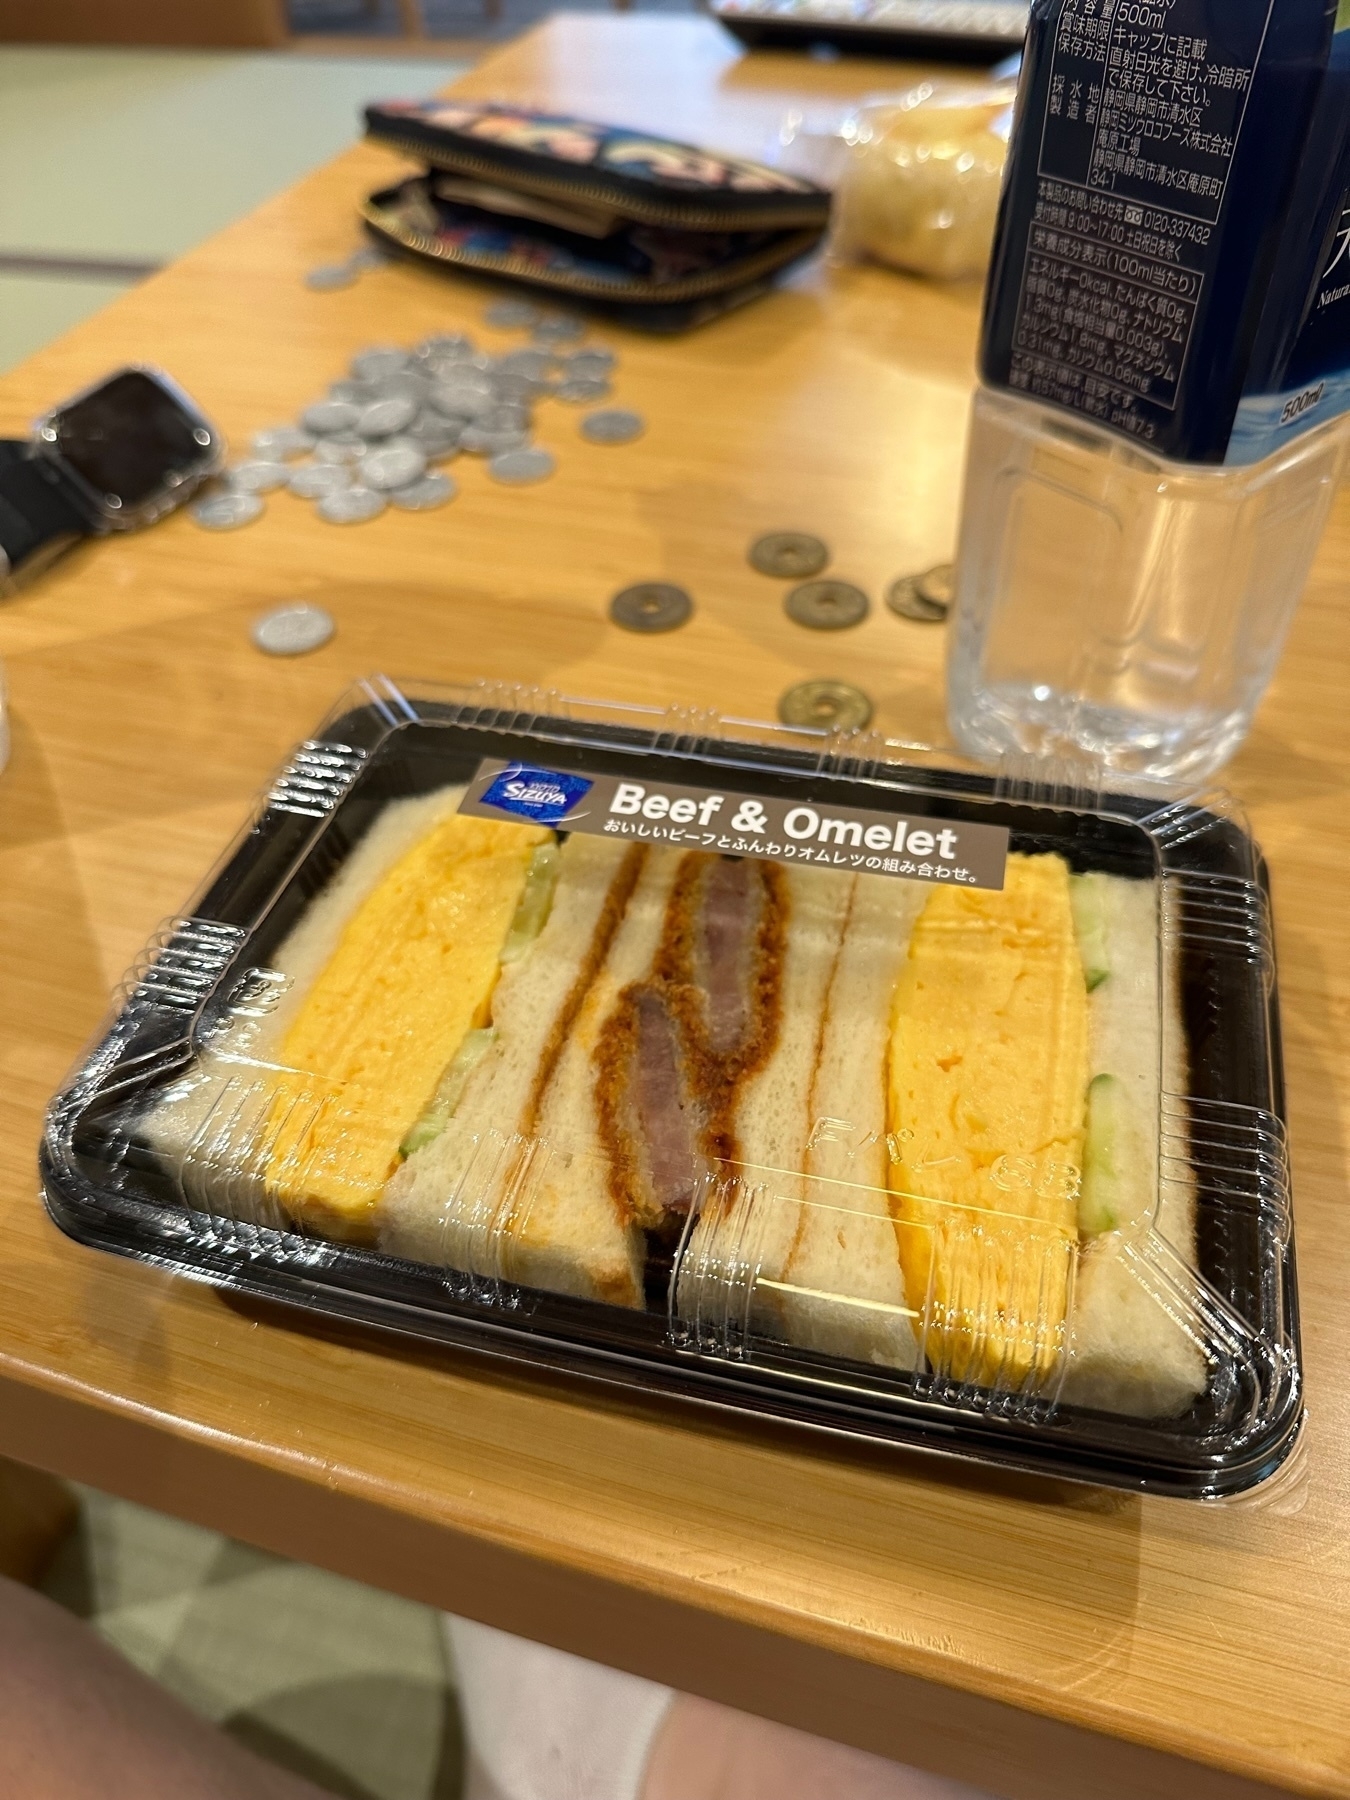 A Beef &amp; Omelet sandwich in a clear plastic container on a wooden table with scattered coins, a wallet, a smartwatch, and a partially visible water bottle in the background.